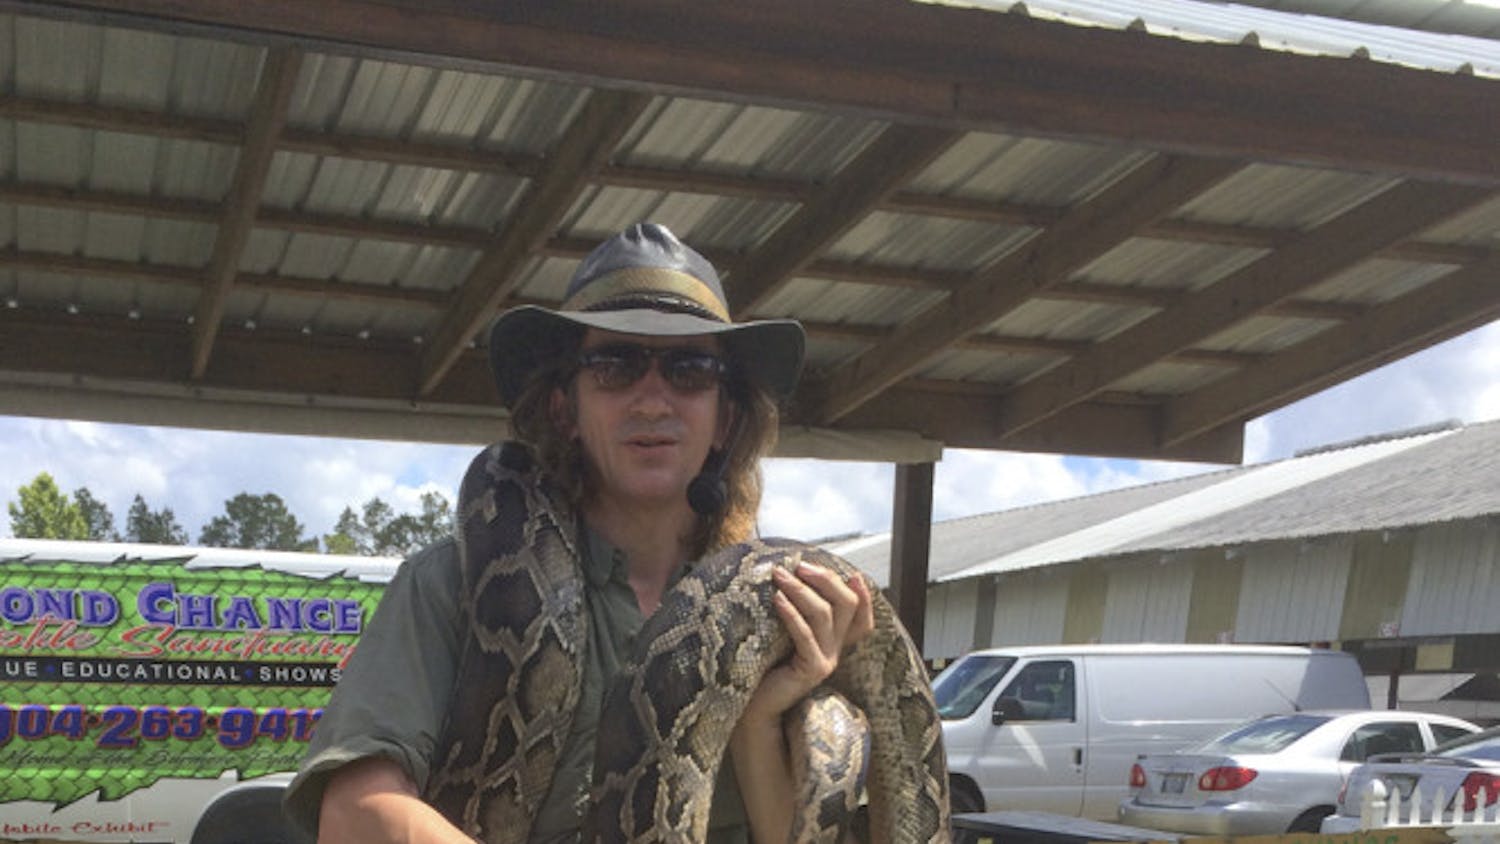 Devin Wheeler, an owner of Second Chance Reptile Sanctuary, holds a 16 foot Burmese python at the Waldo Farmers and Flea Market on Sunday. Wheeler started the sanctuary with Mitra Snyder to provide a home to reptiles that wouldn’t be able to survive in the wild.